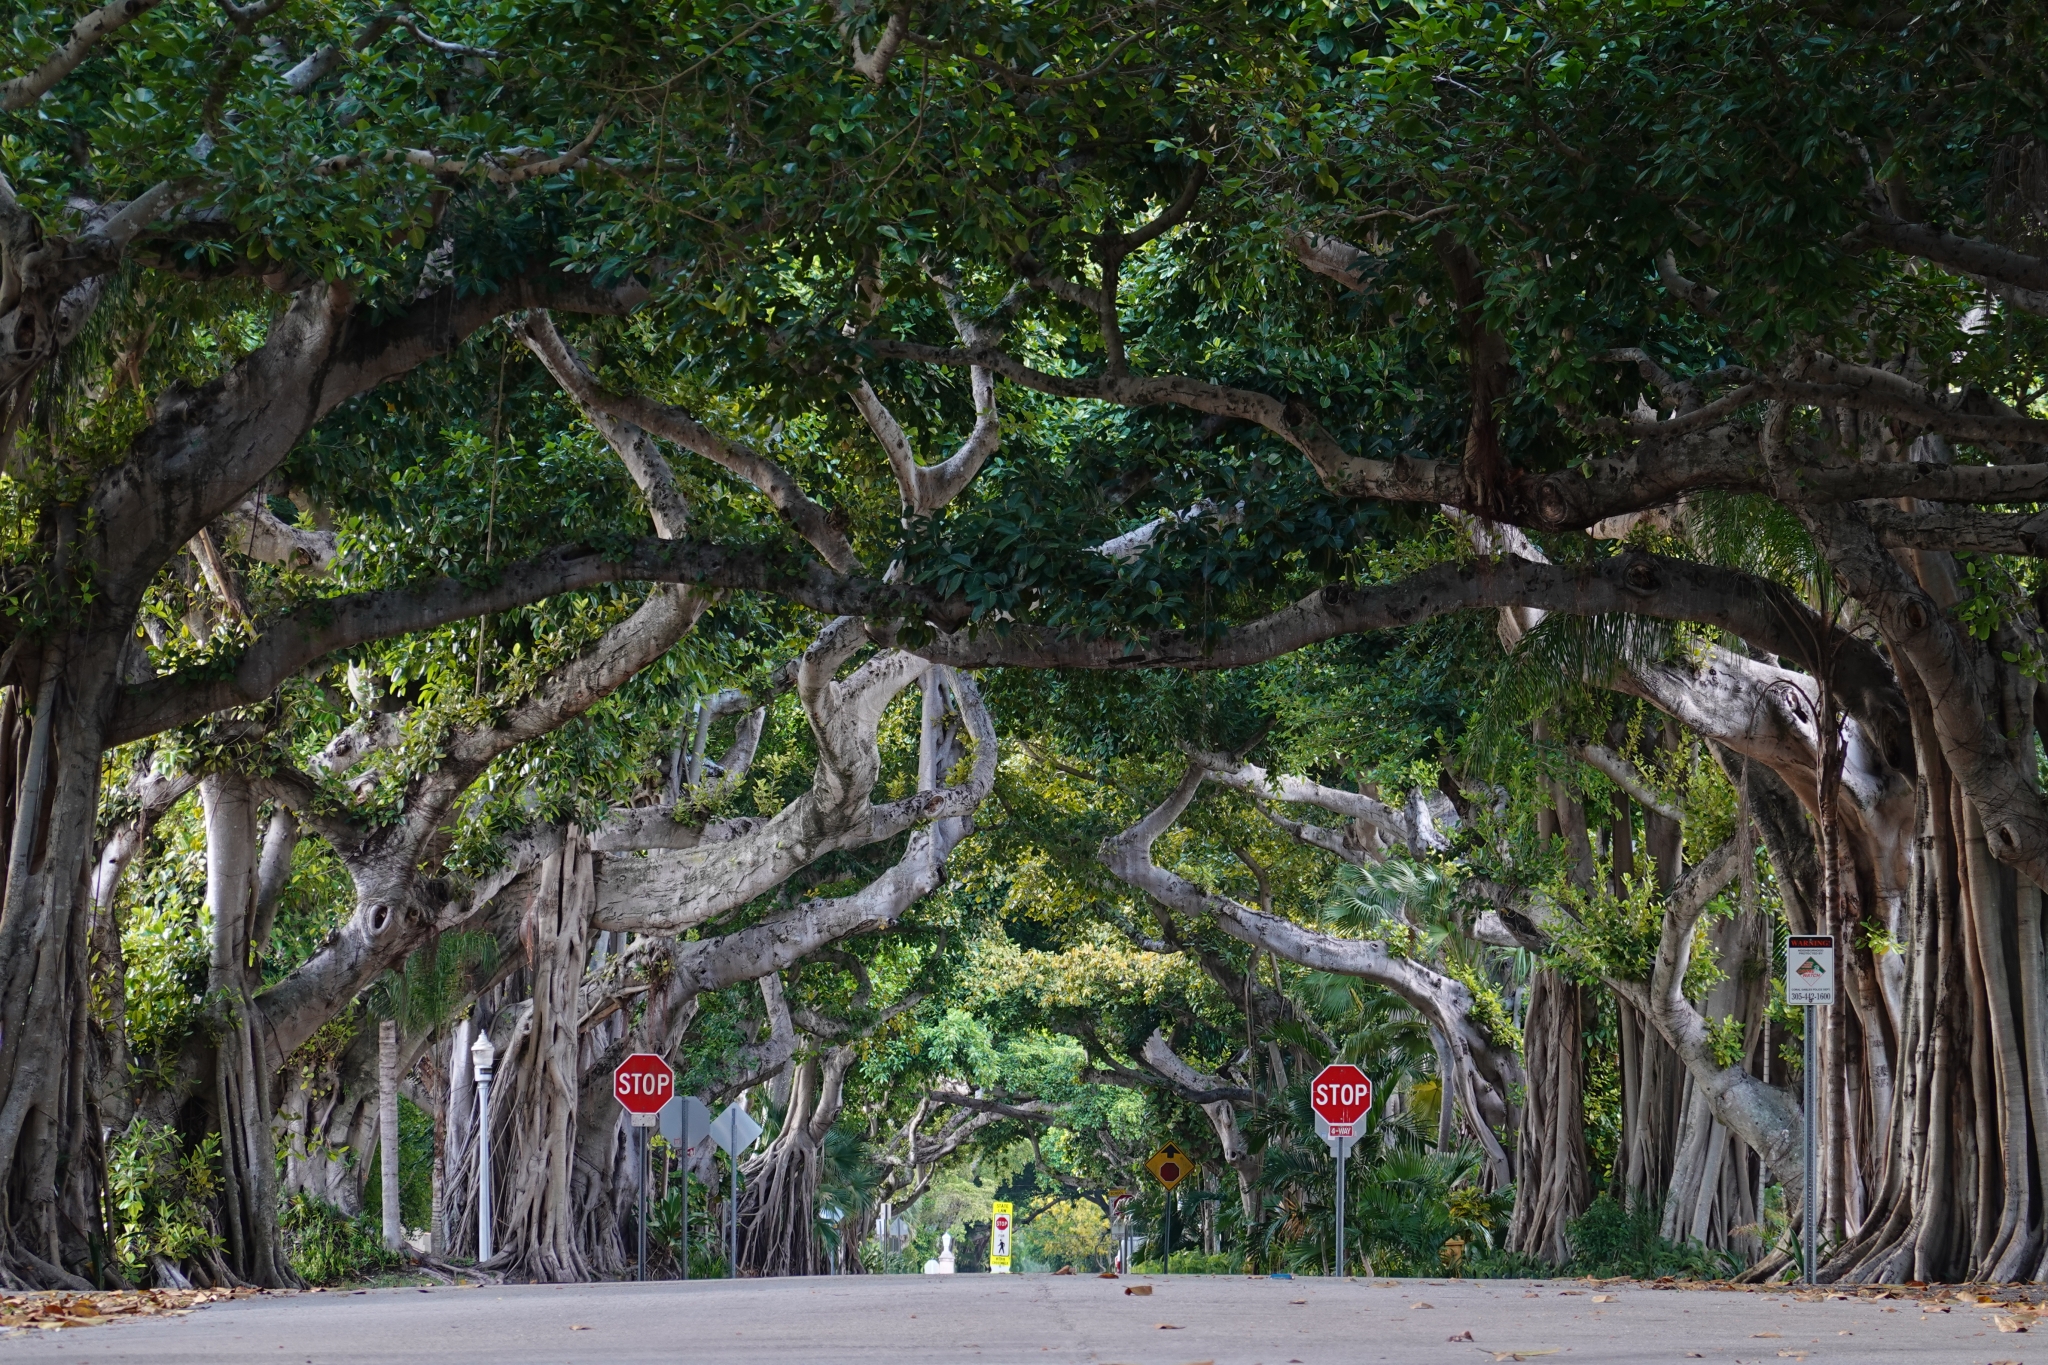 Large trees growing over a road forming a green tunnel